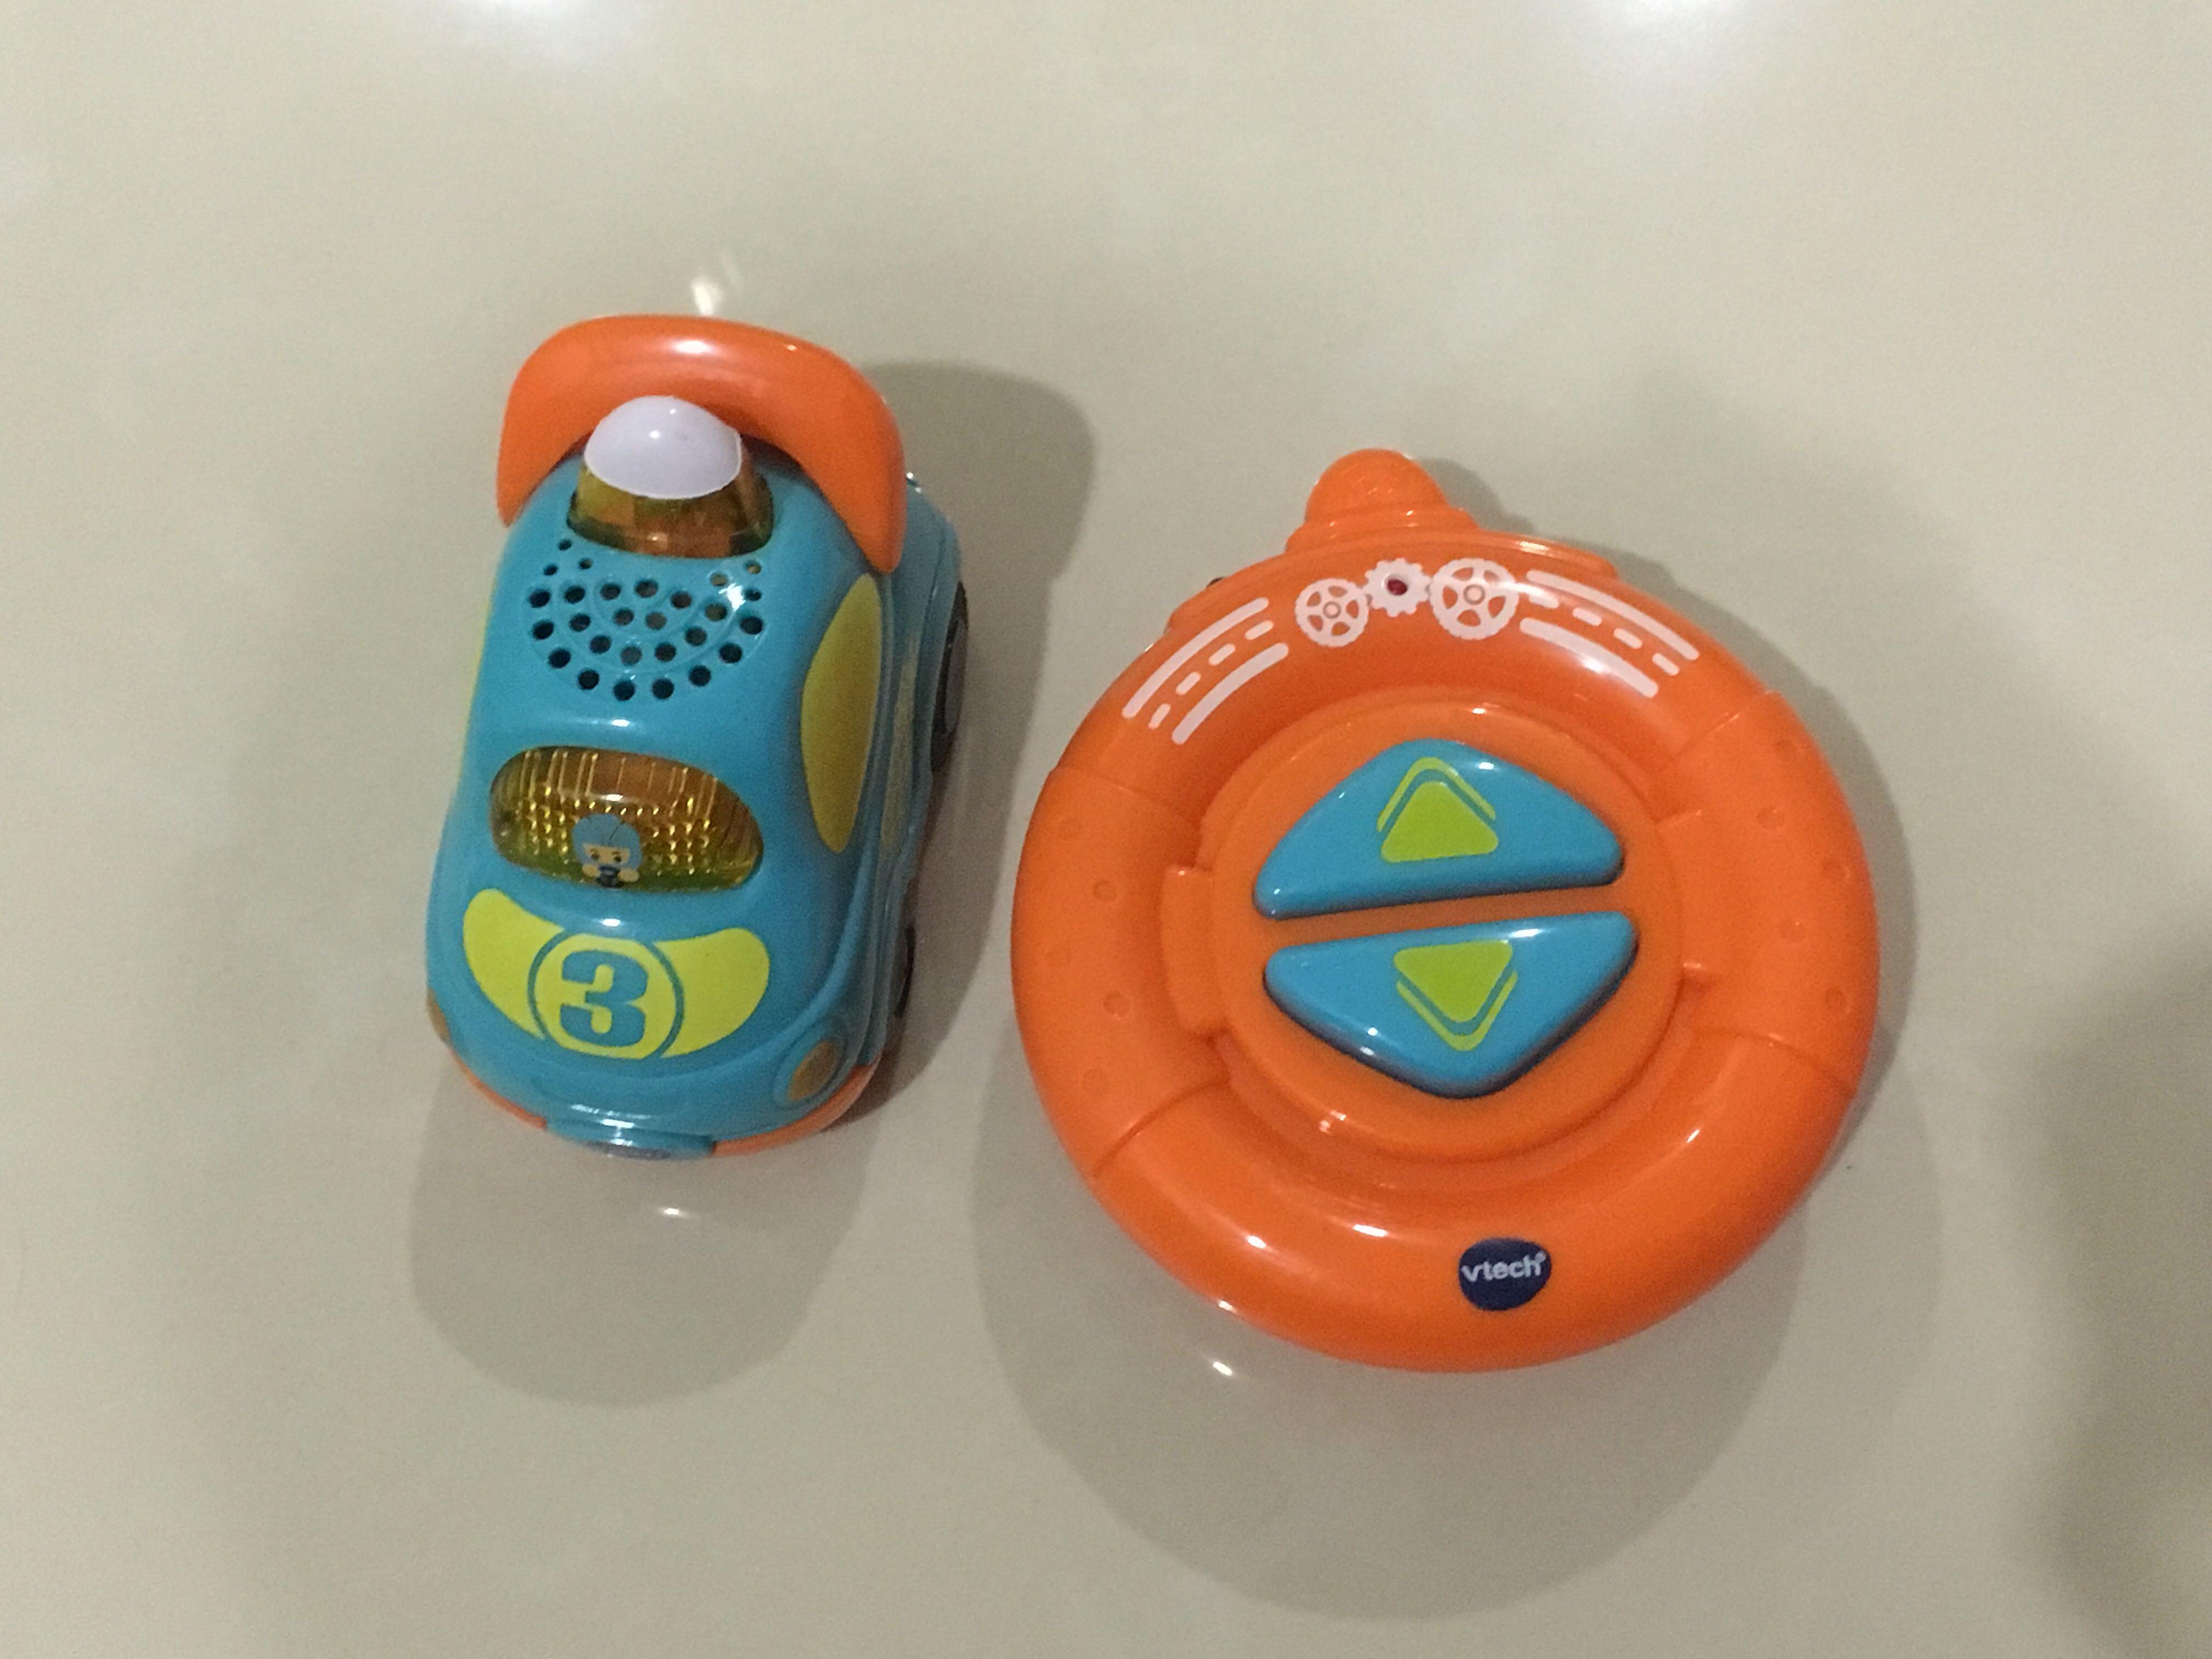 vtech remote control car not working